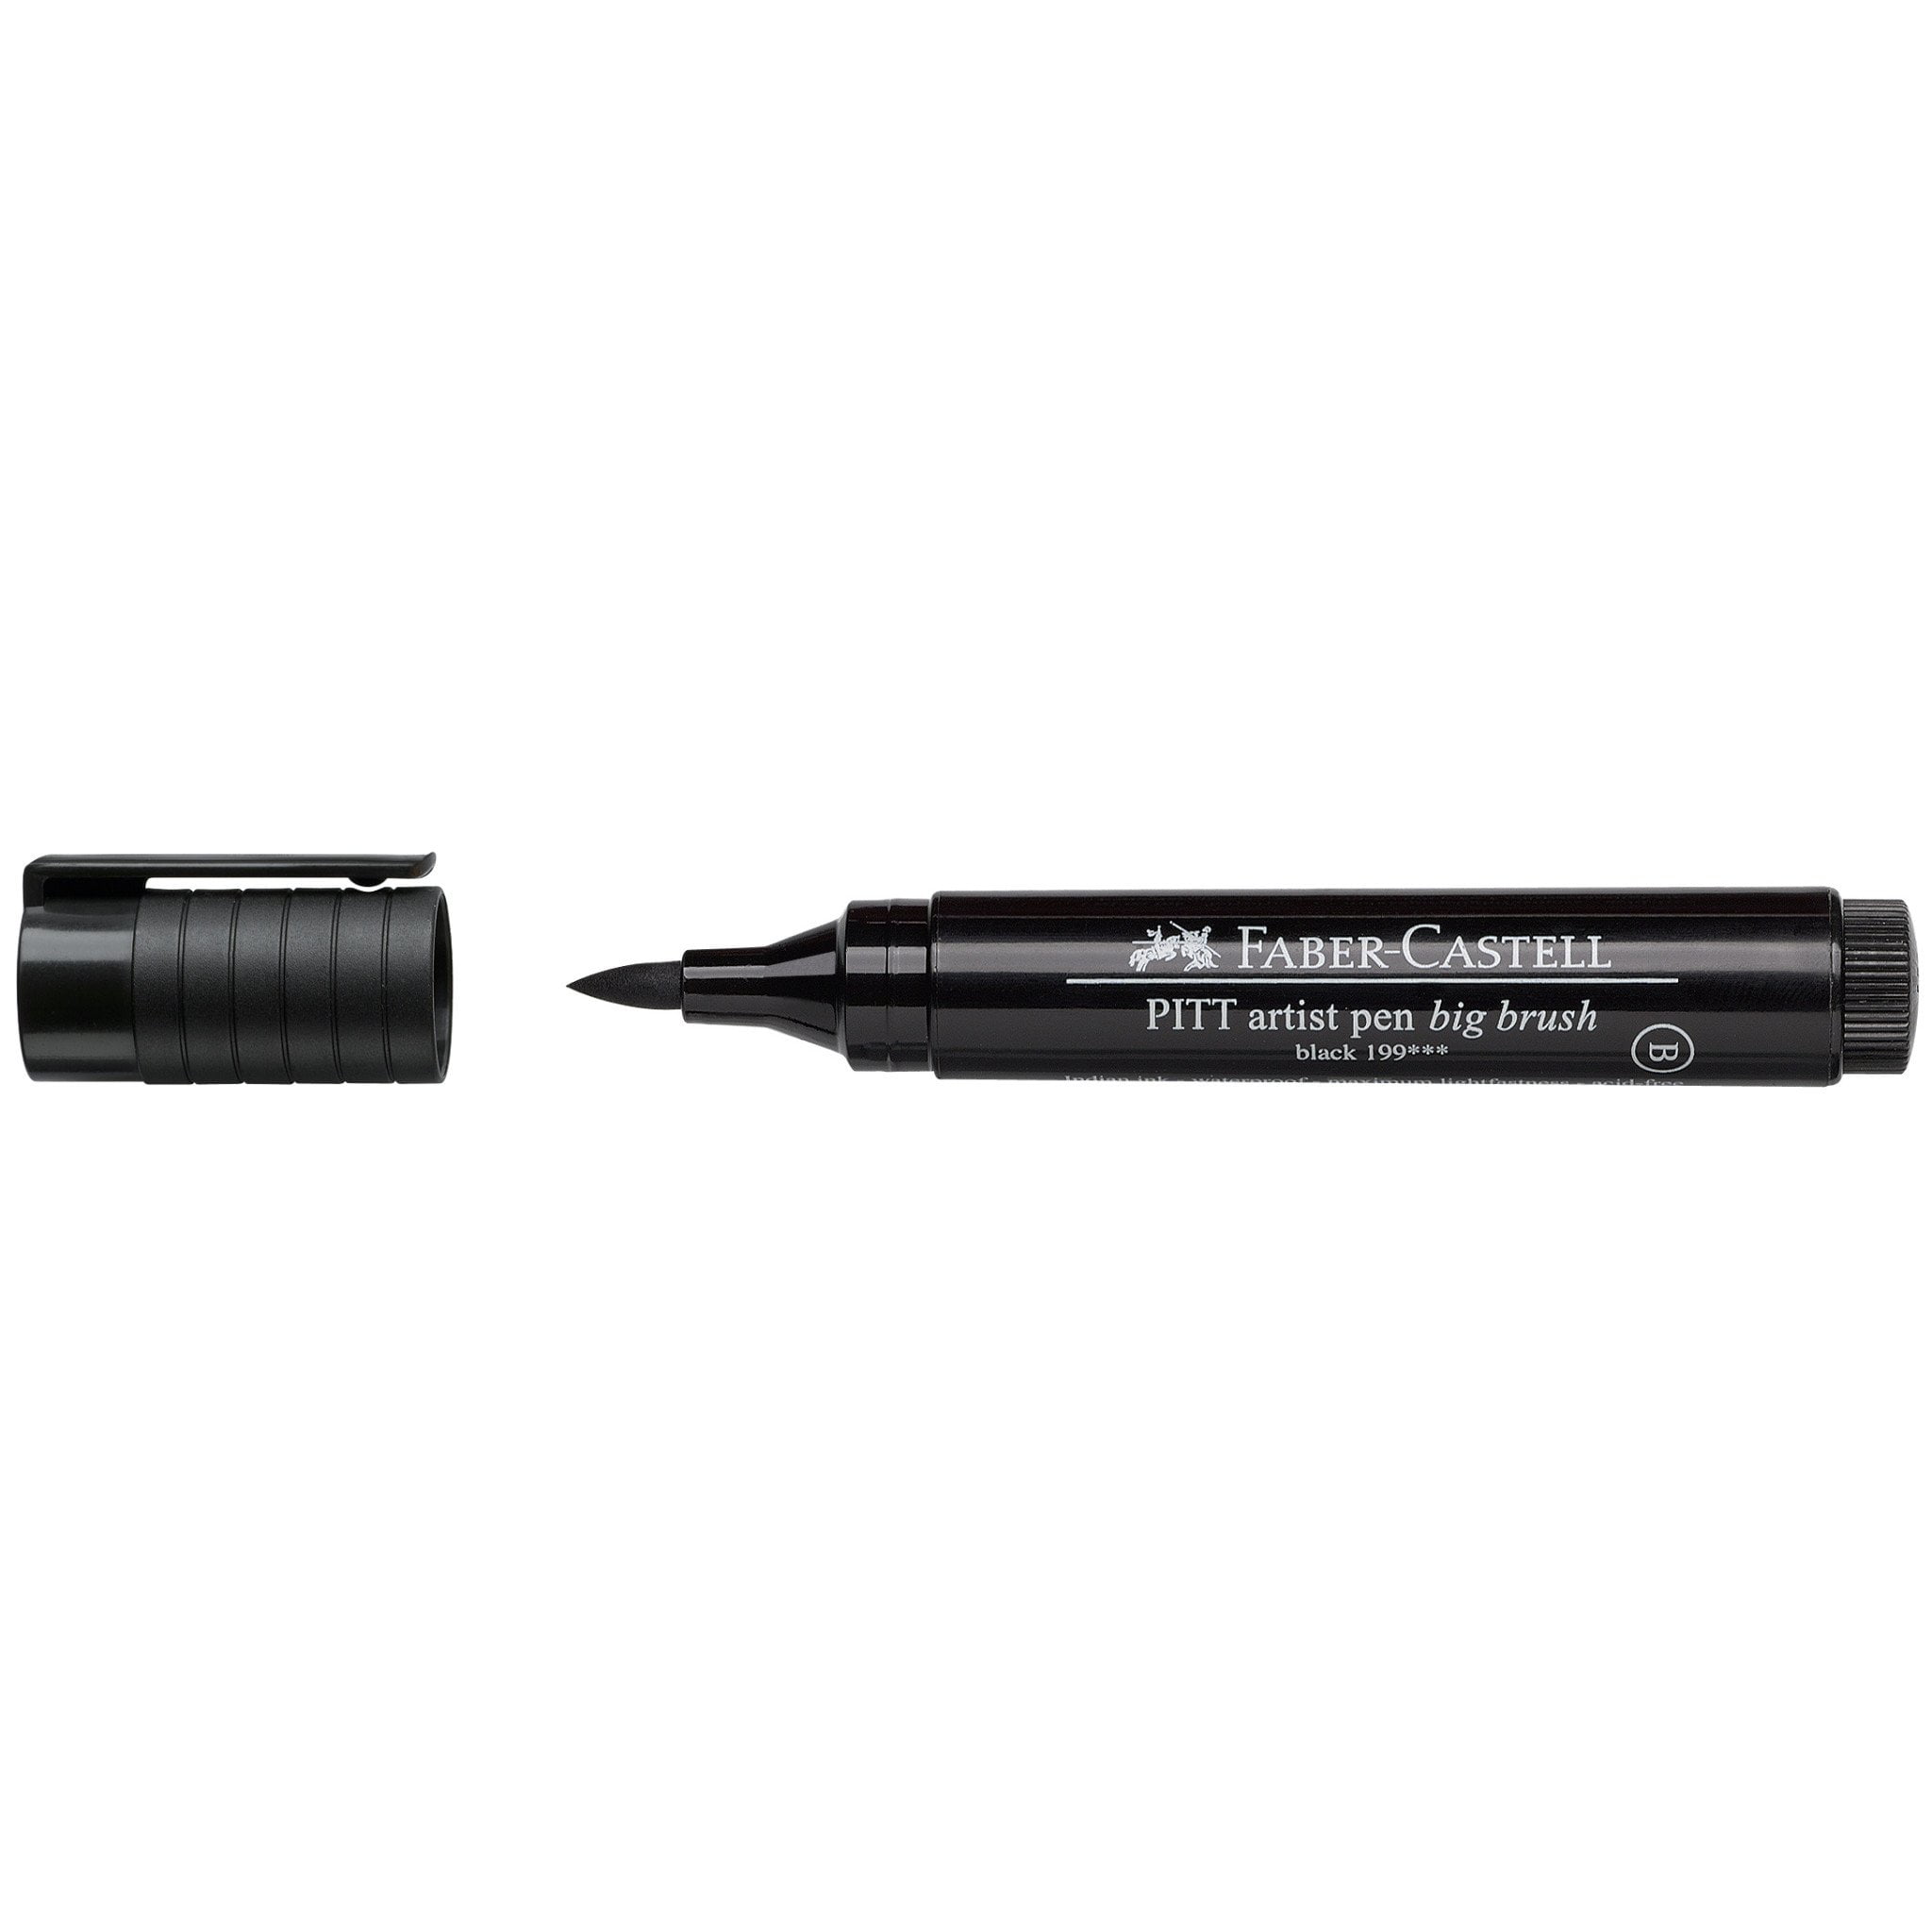 Advertising Paint Brush Pens with Black Handle